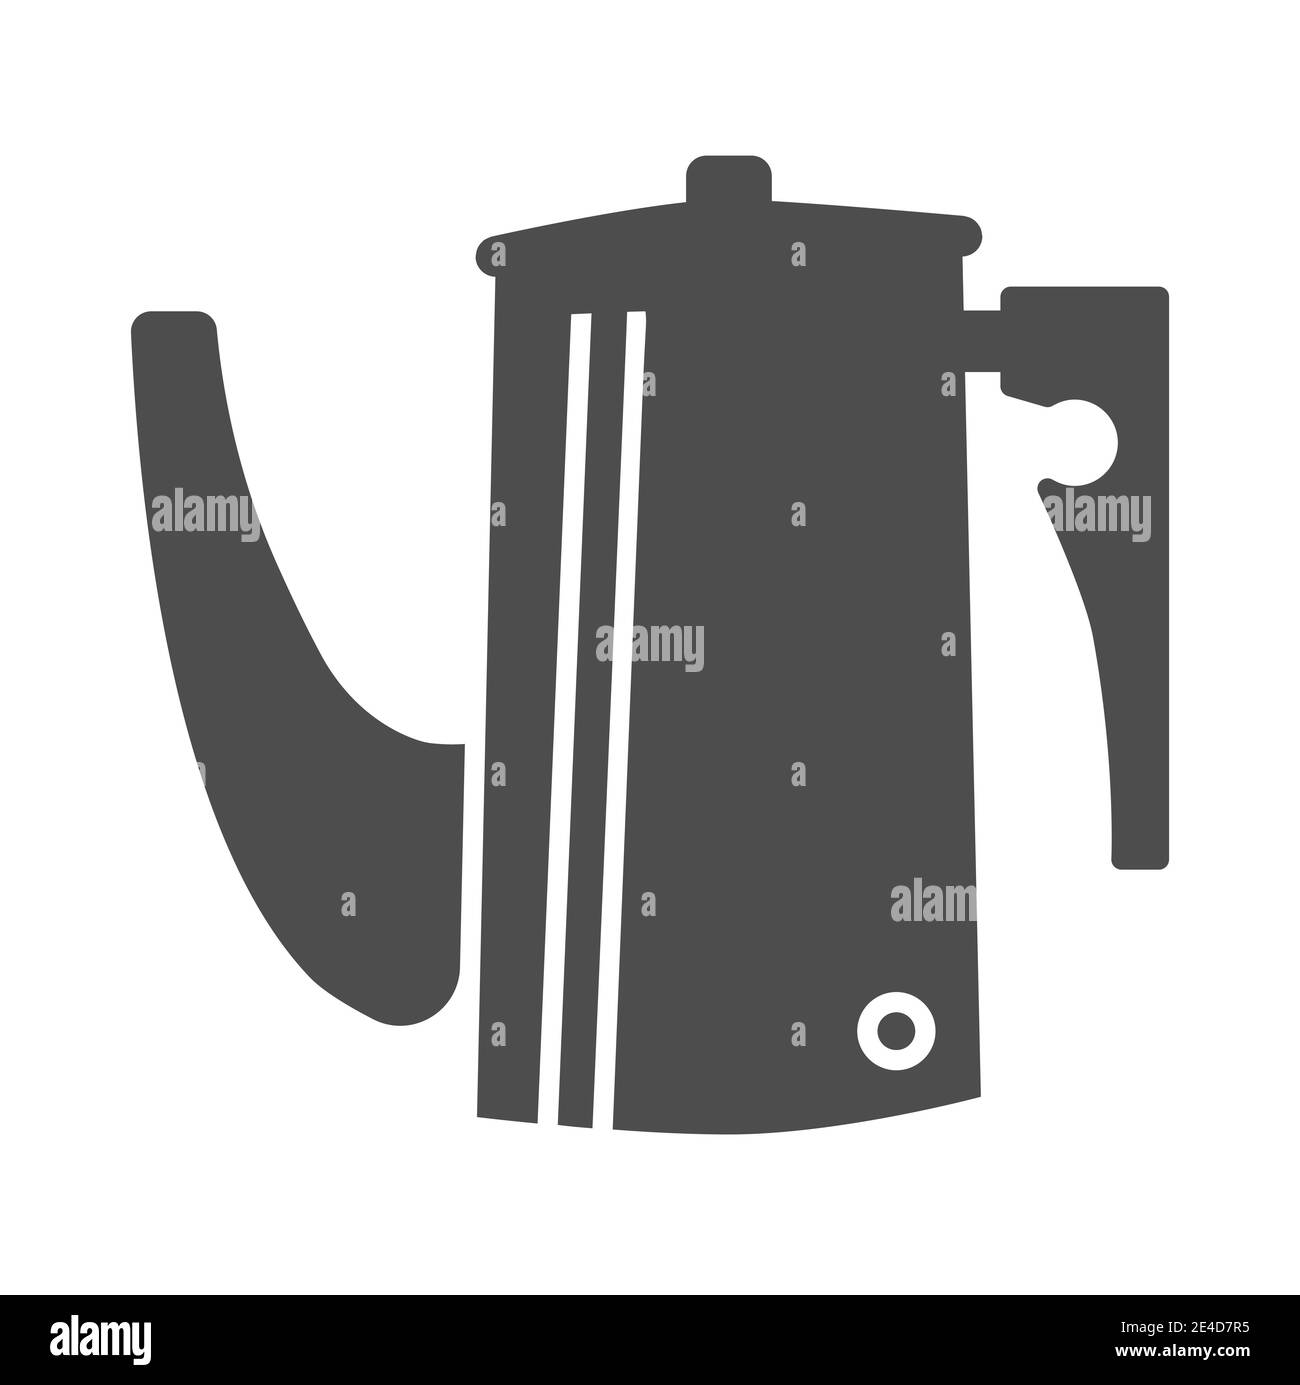 https://c8.alamy.com/comp/2E4D7R5/kettle-solid-icon-kitchen-utensils-concept-coffee-brewing-kettle-with-long-thin-spout-sign-on-white-background-coffee-pot-icon-in-glyph-style-for-2E4D7R5.jpg